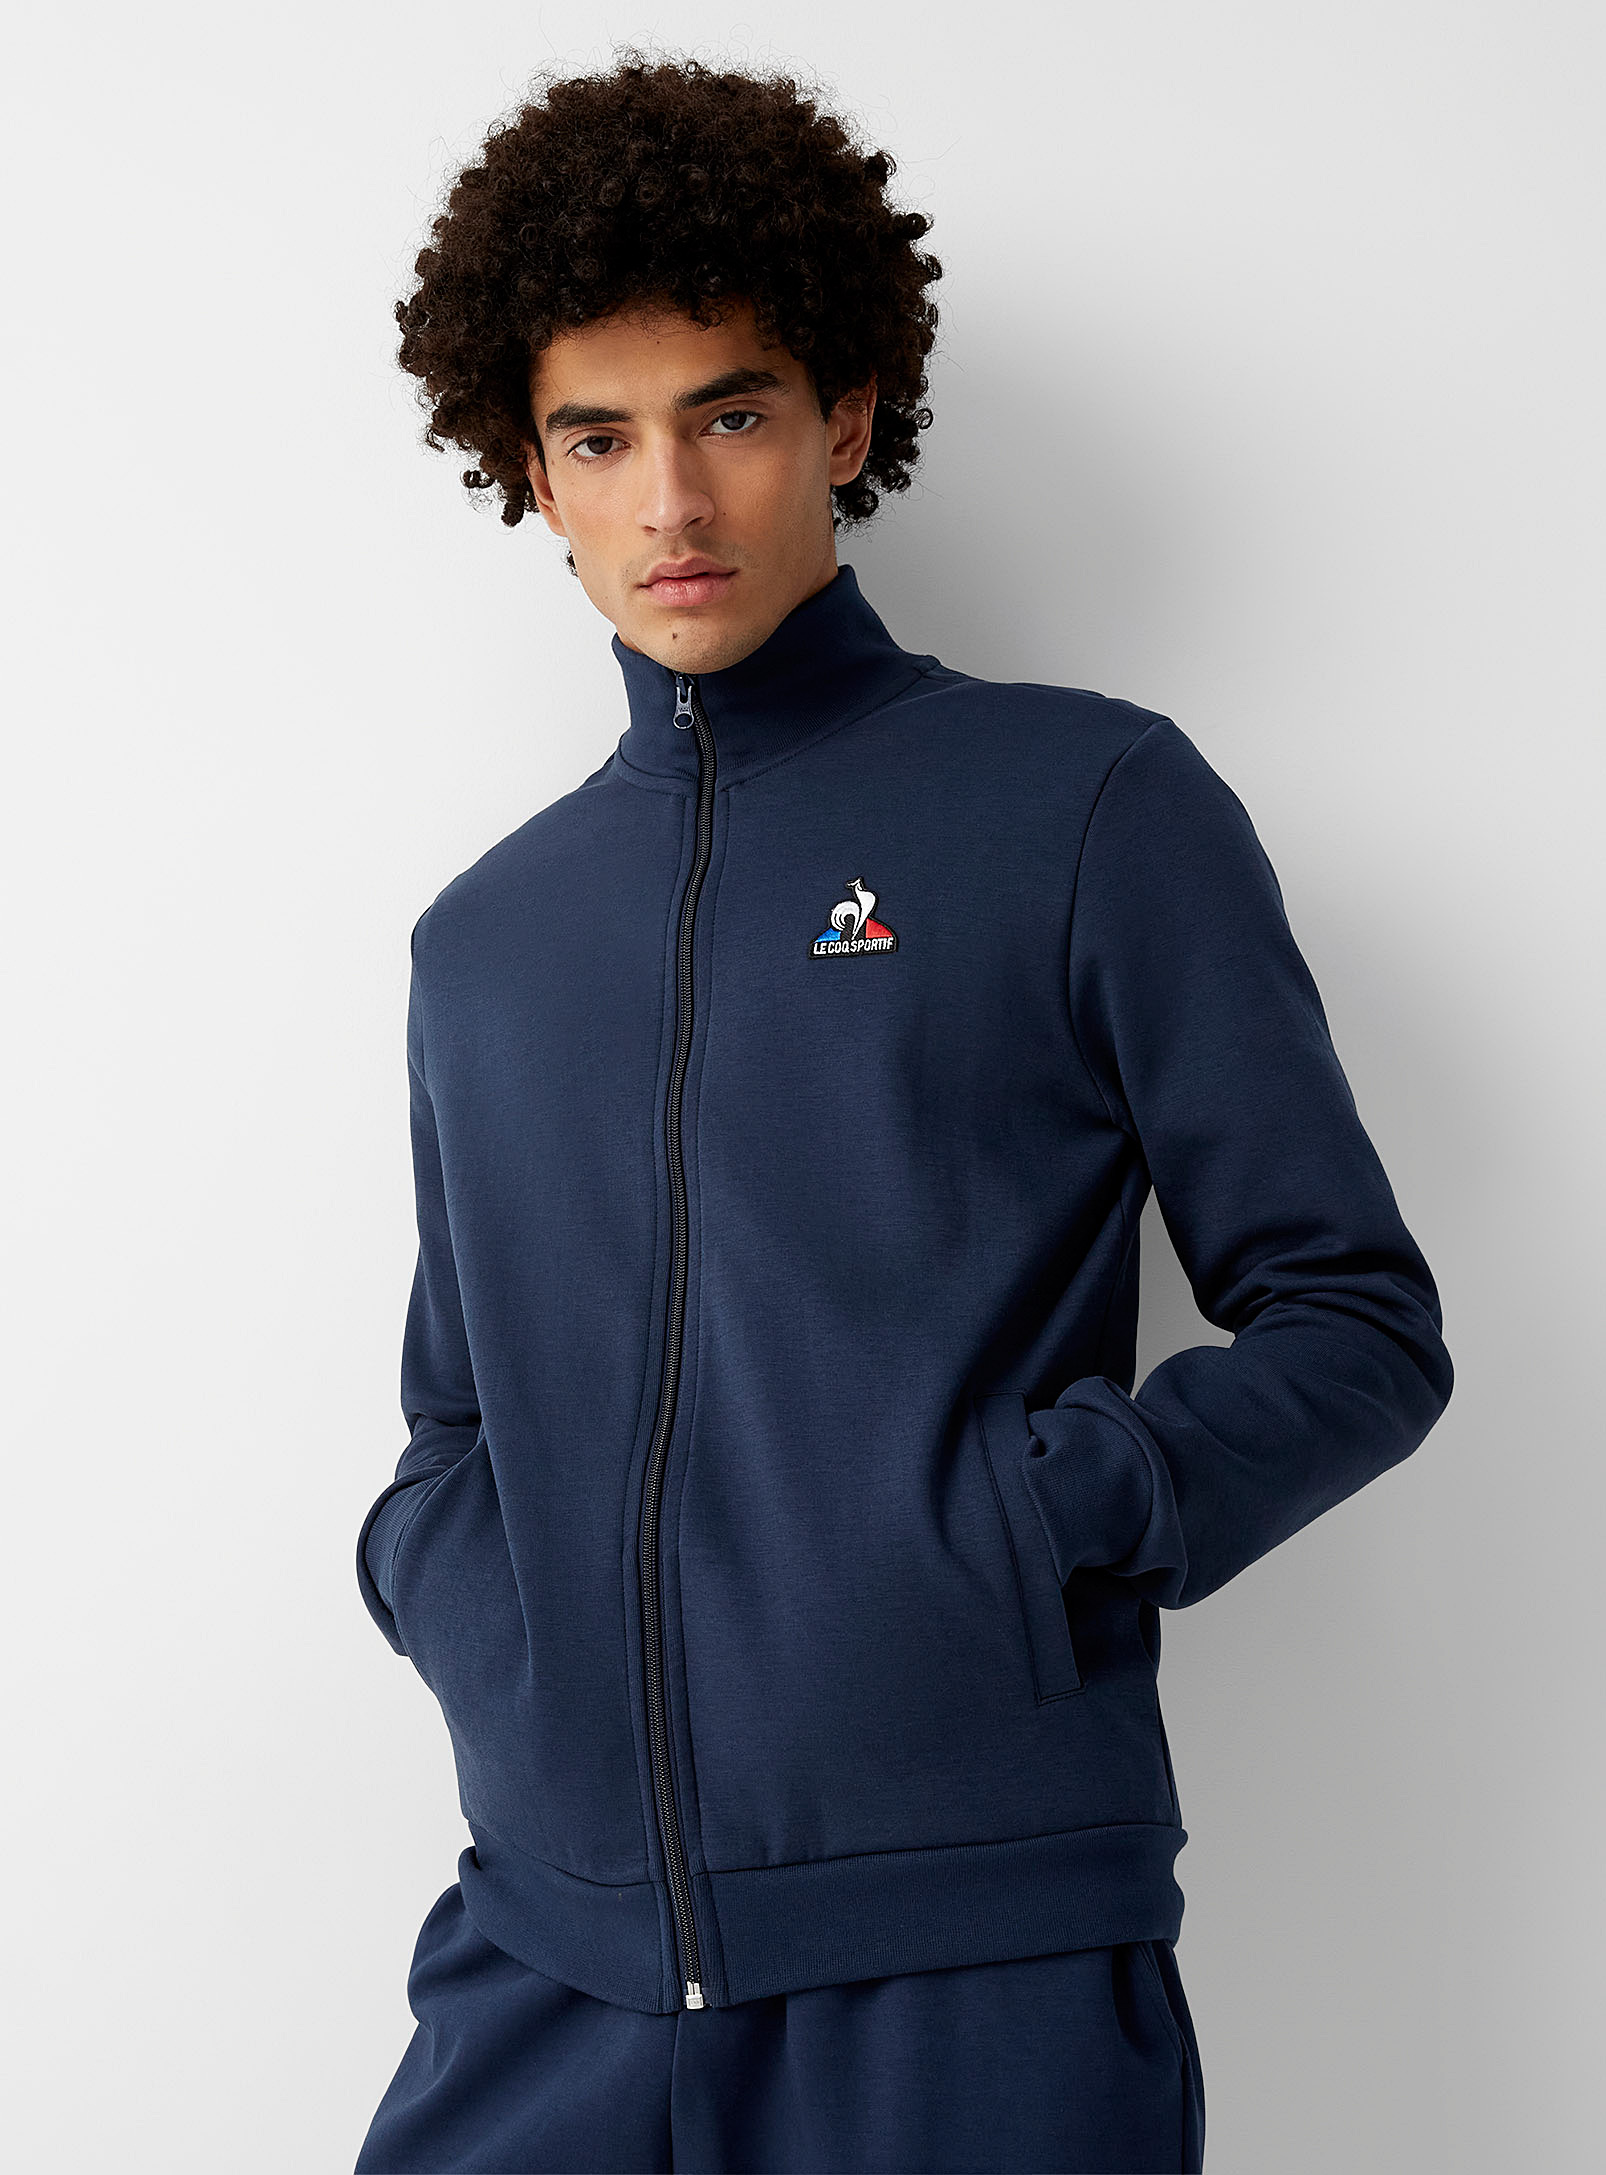 Le Coq Sportif Structured Jersey Athletic Jacket In Marine Blue